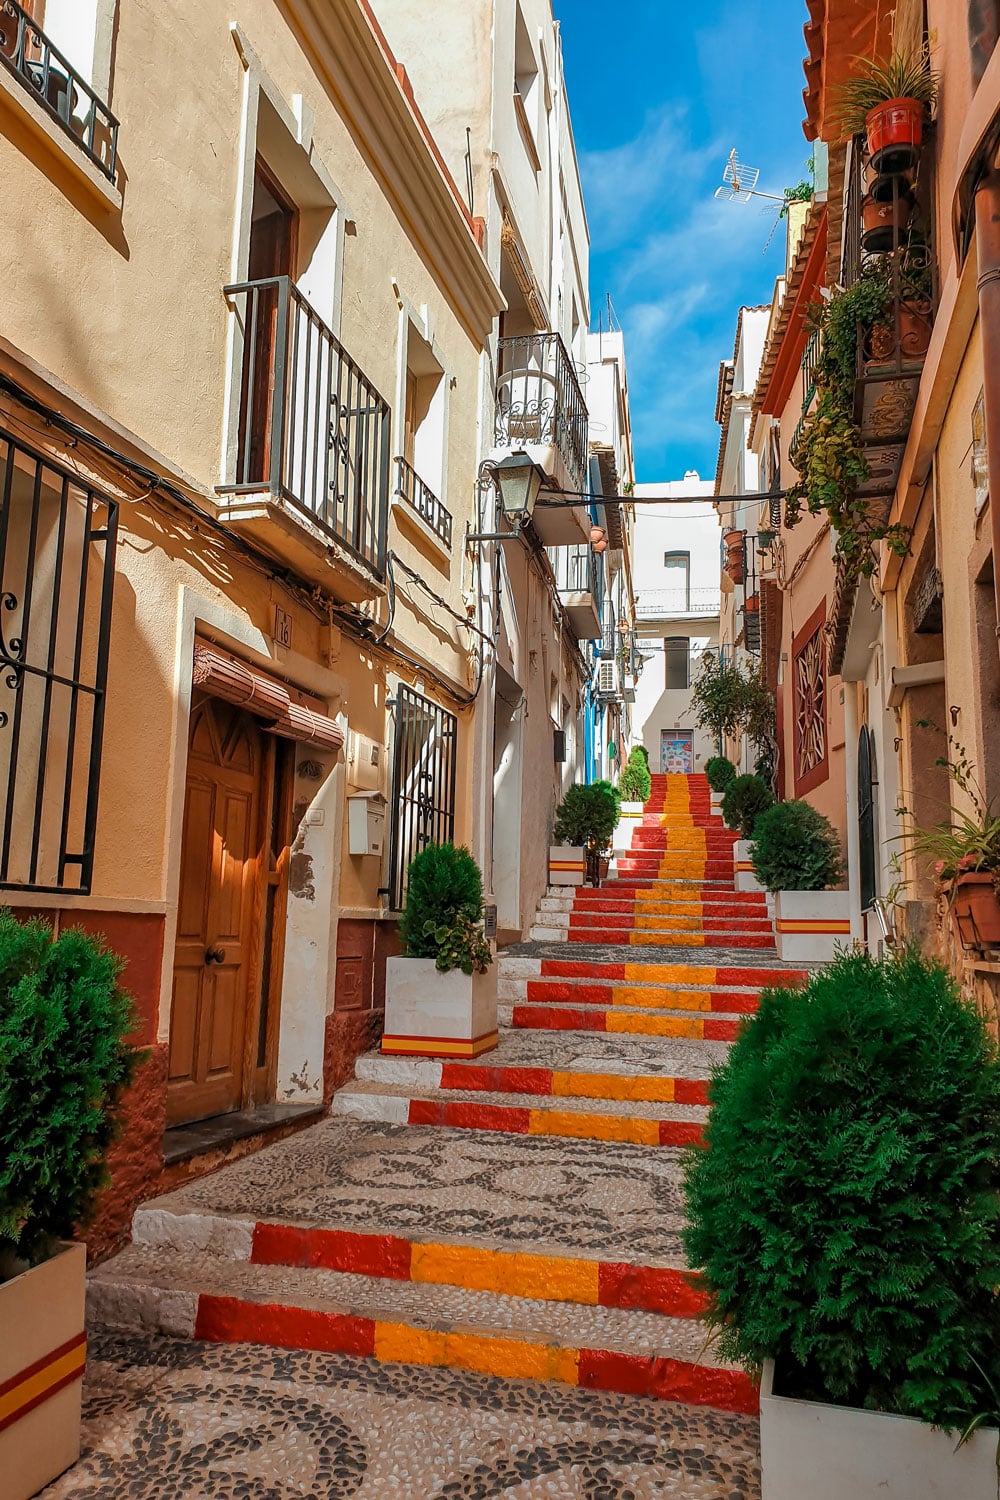 The steps in Calpe are painted in red and yellow, resembling the colors of the Spanish flag.